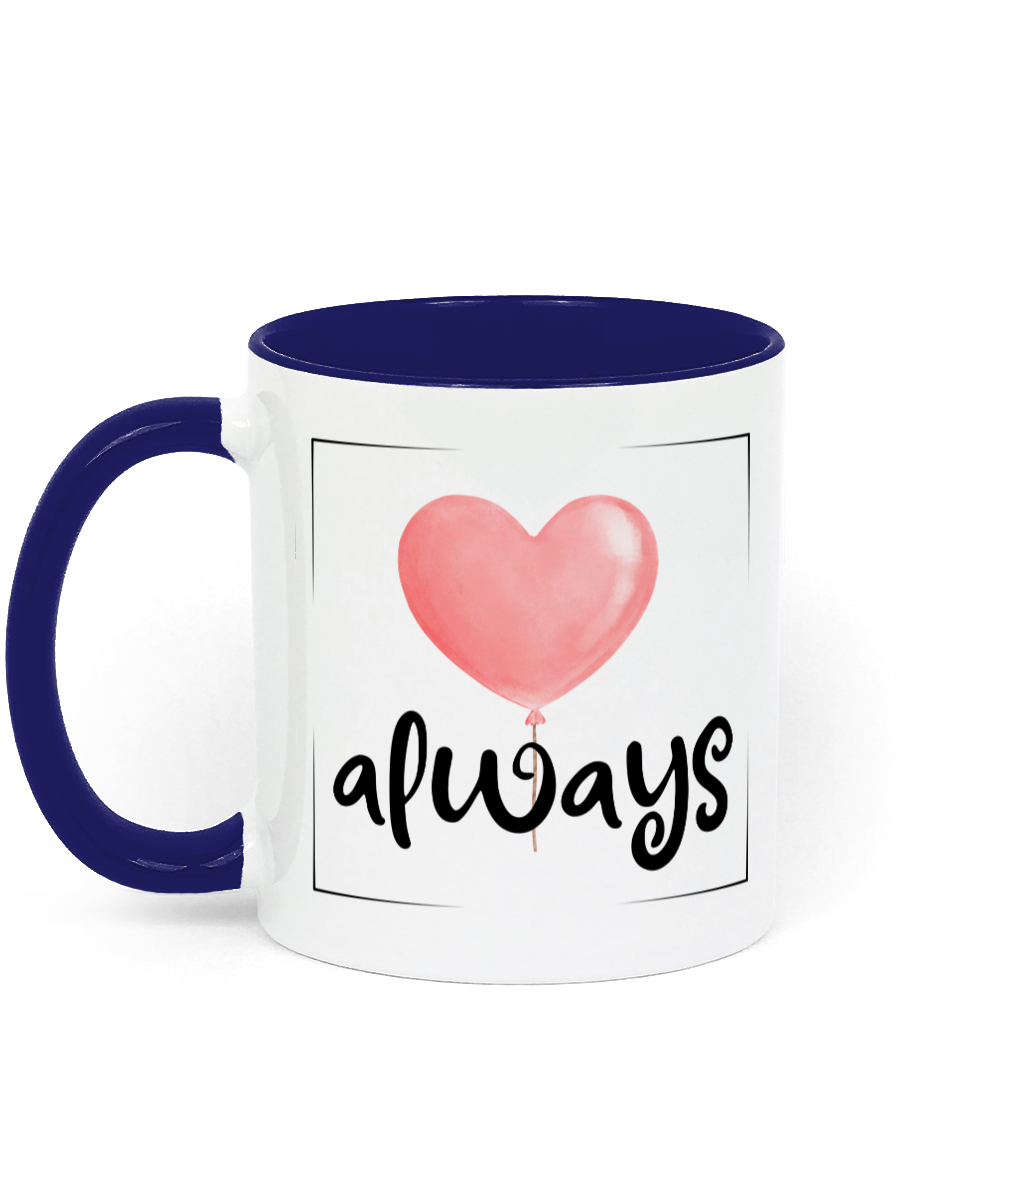 Love Always. .11 oz mug. Love. Thoughtfulness.Daily Affirmations, Motivation, Inspiration. Perfect Gift. Two-Toned. Blue.